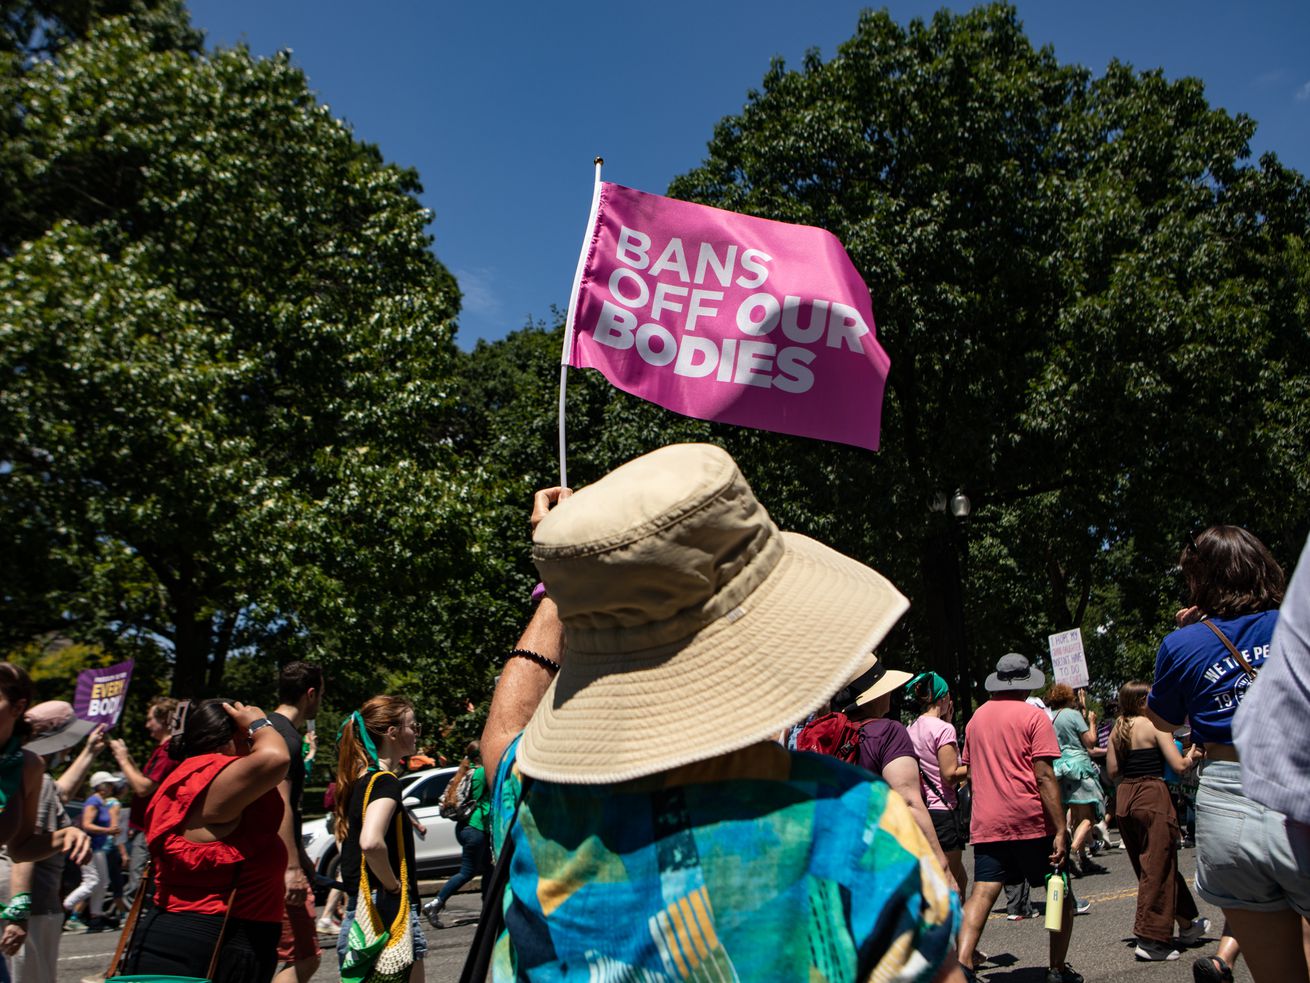 A person in a sun hat walks in a crowd waving a flag that reads “Bans off our bodies.”